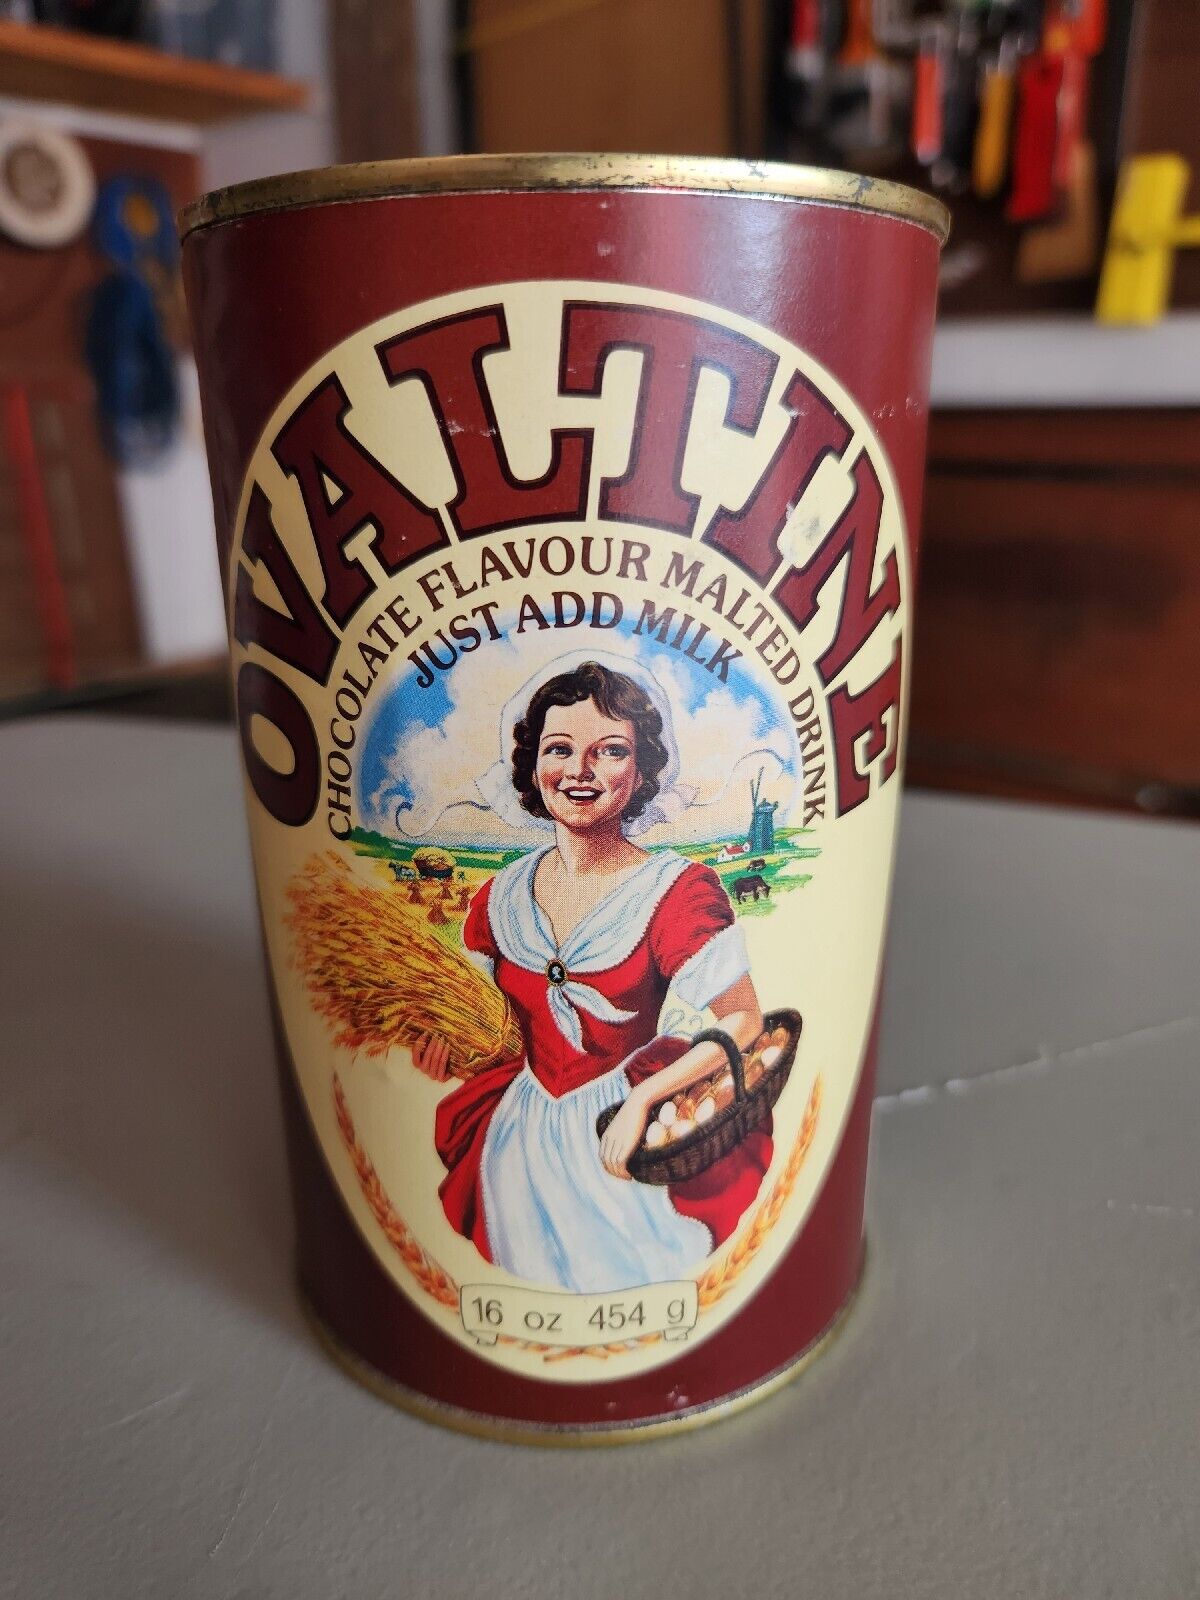 Original Ovaltine Canister and Glass Bottle